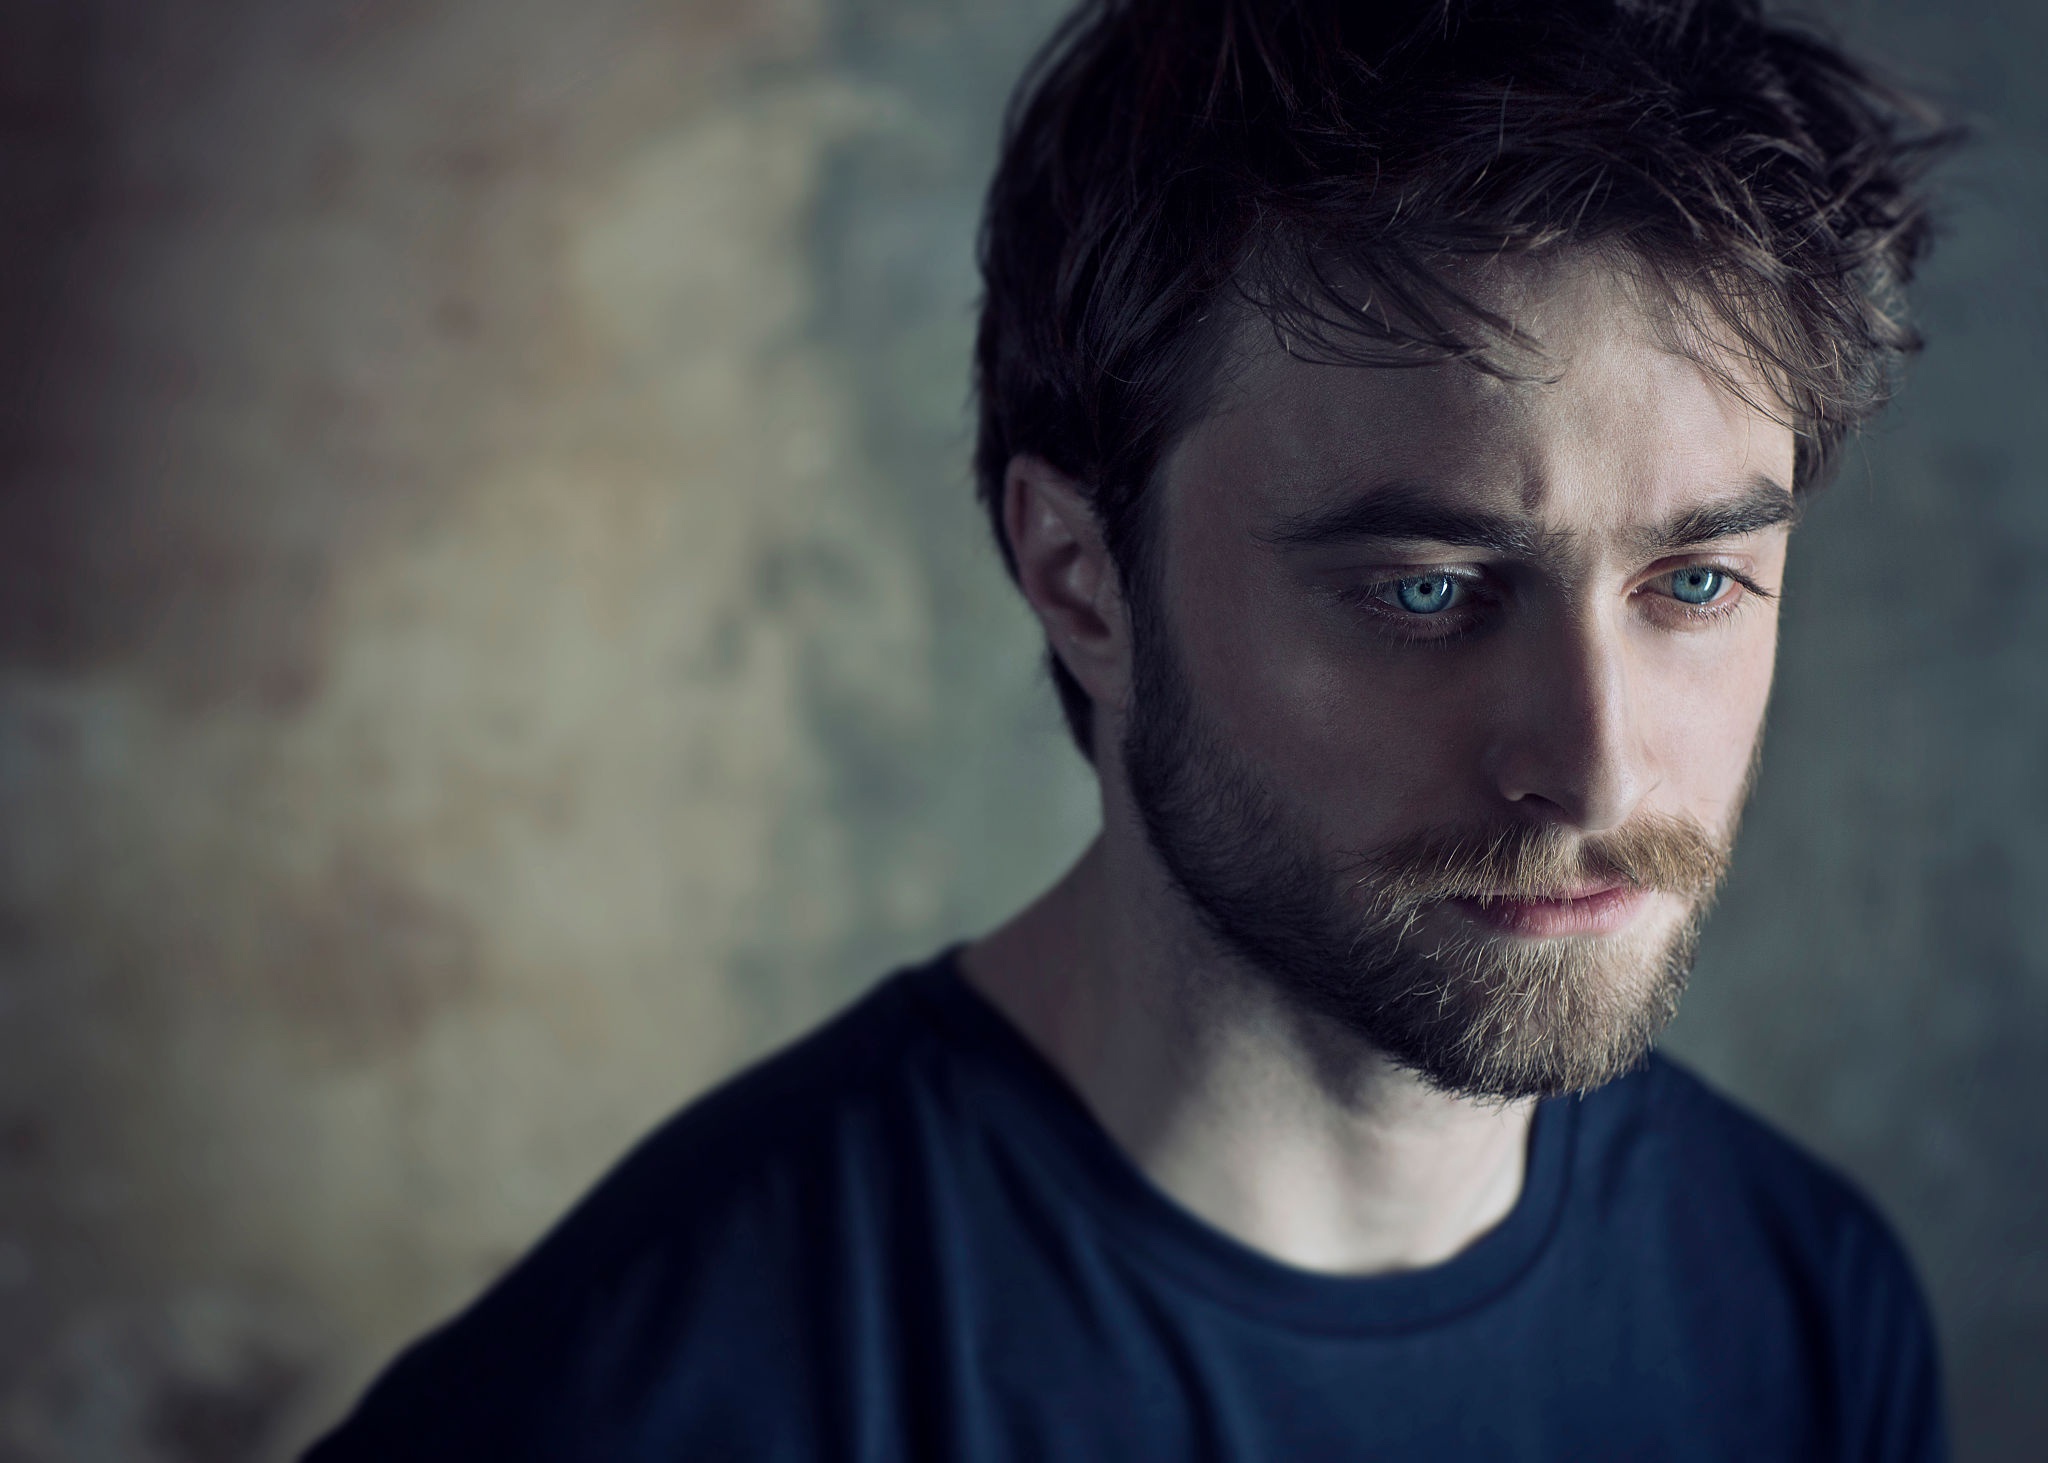 Free download Daniel Radcliffe Wallpapers High Quality Download Free  1278x1920 for your Desktop Mobile  Tablet  Explore 76 Daniel  Radcliffe Wallpaper  James Bond Daniel Craig Wallpaper Daniel Radcliffe  2015 Wallpaper Daniel Radcliffe Wallpapers